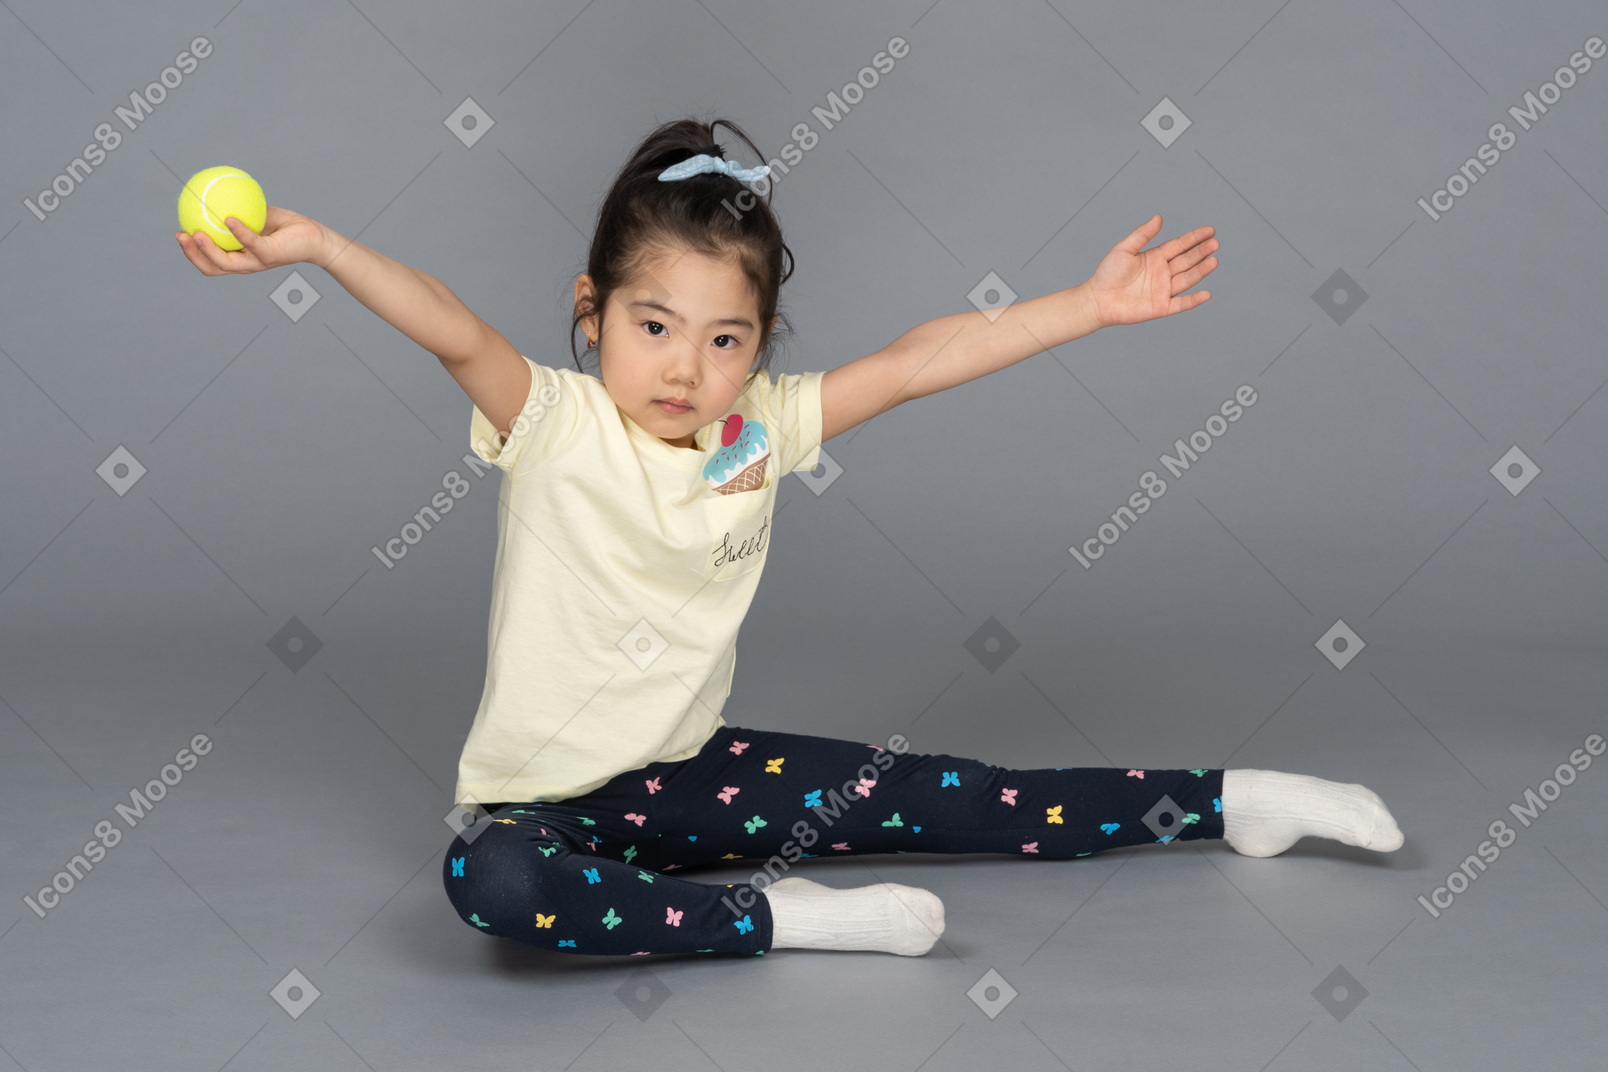 Girl with a tennis ball sitting on the floor